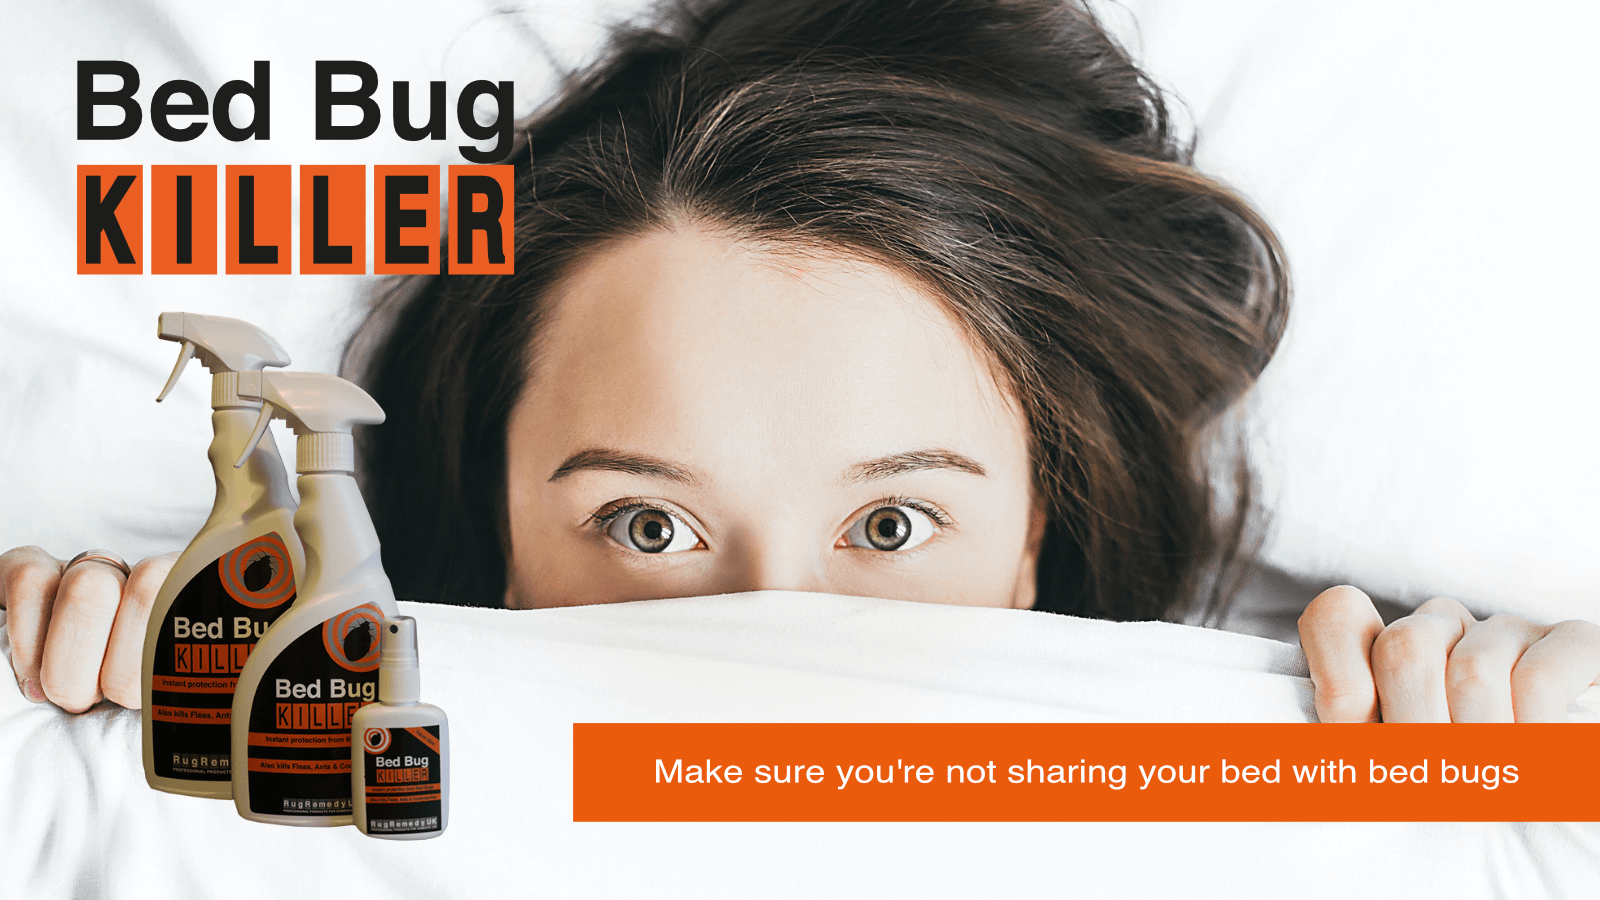 Image of a little girl peeping out from bedcovers. Bed Bug Killer bottles and the caption  'Make sure you're not sharing your bed with bedbugs.